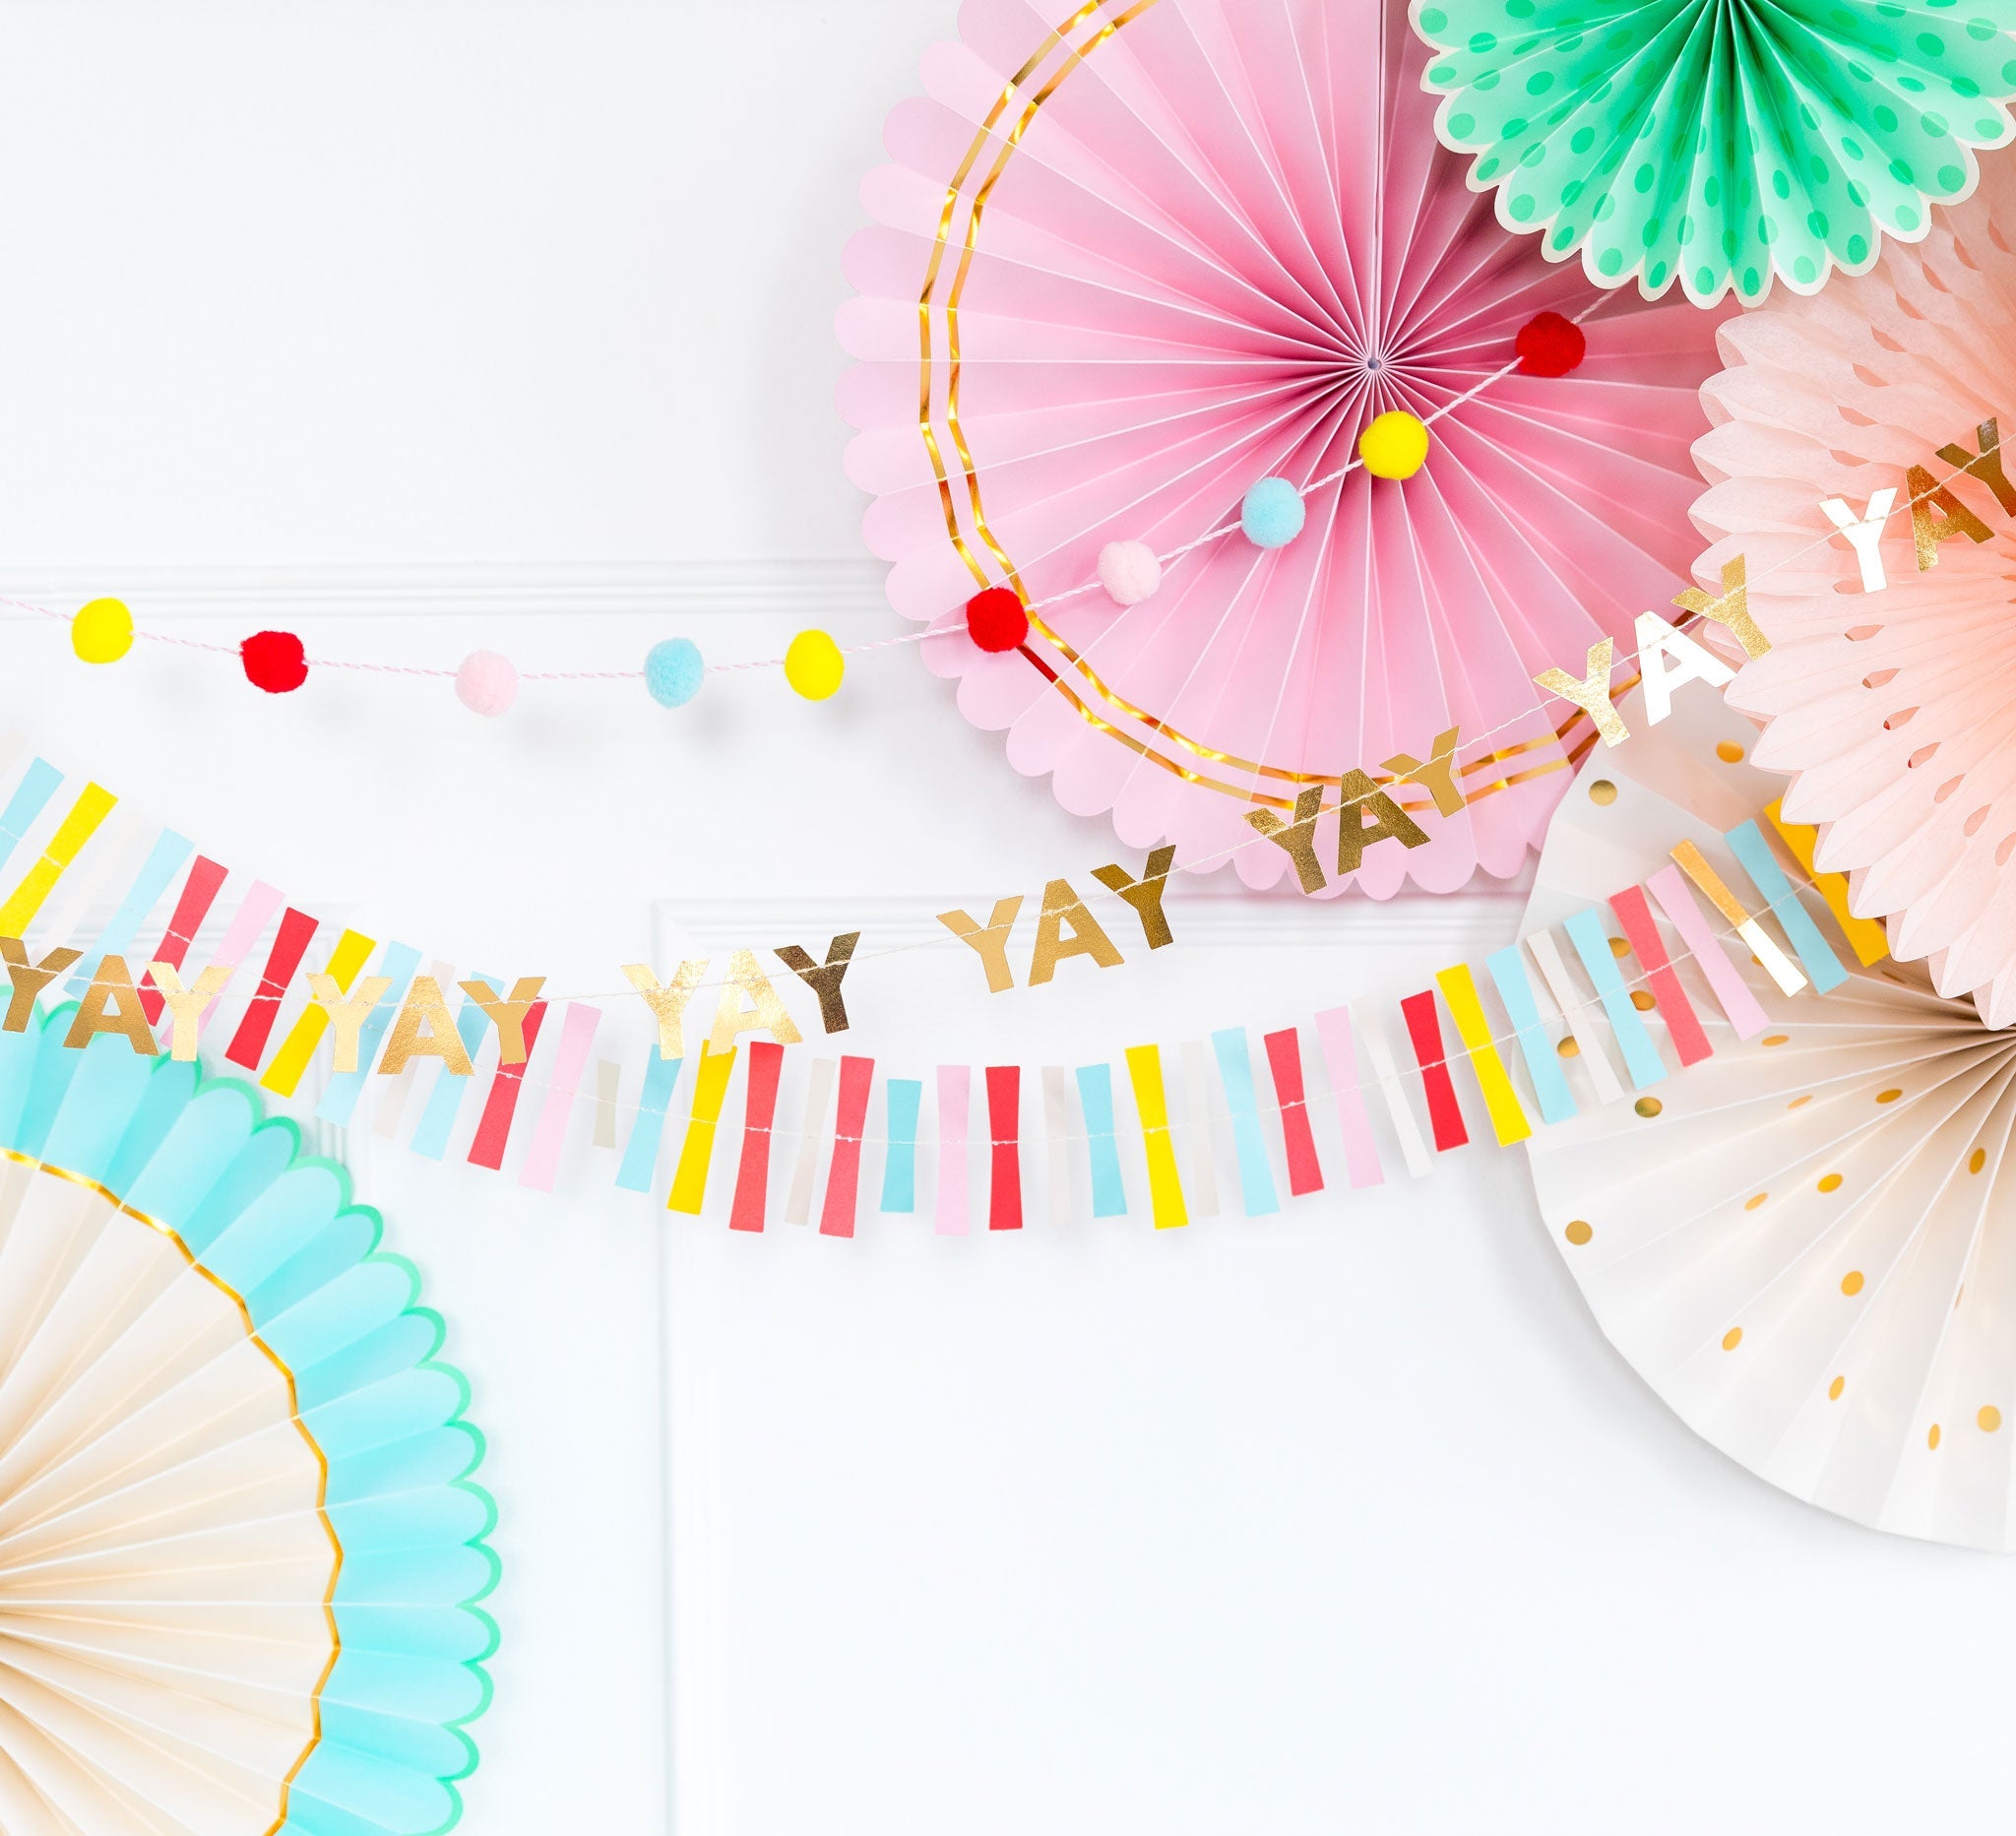 Oh So Fancy Party has selected these modern and stylish banners and garlands to dress up your party!